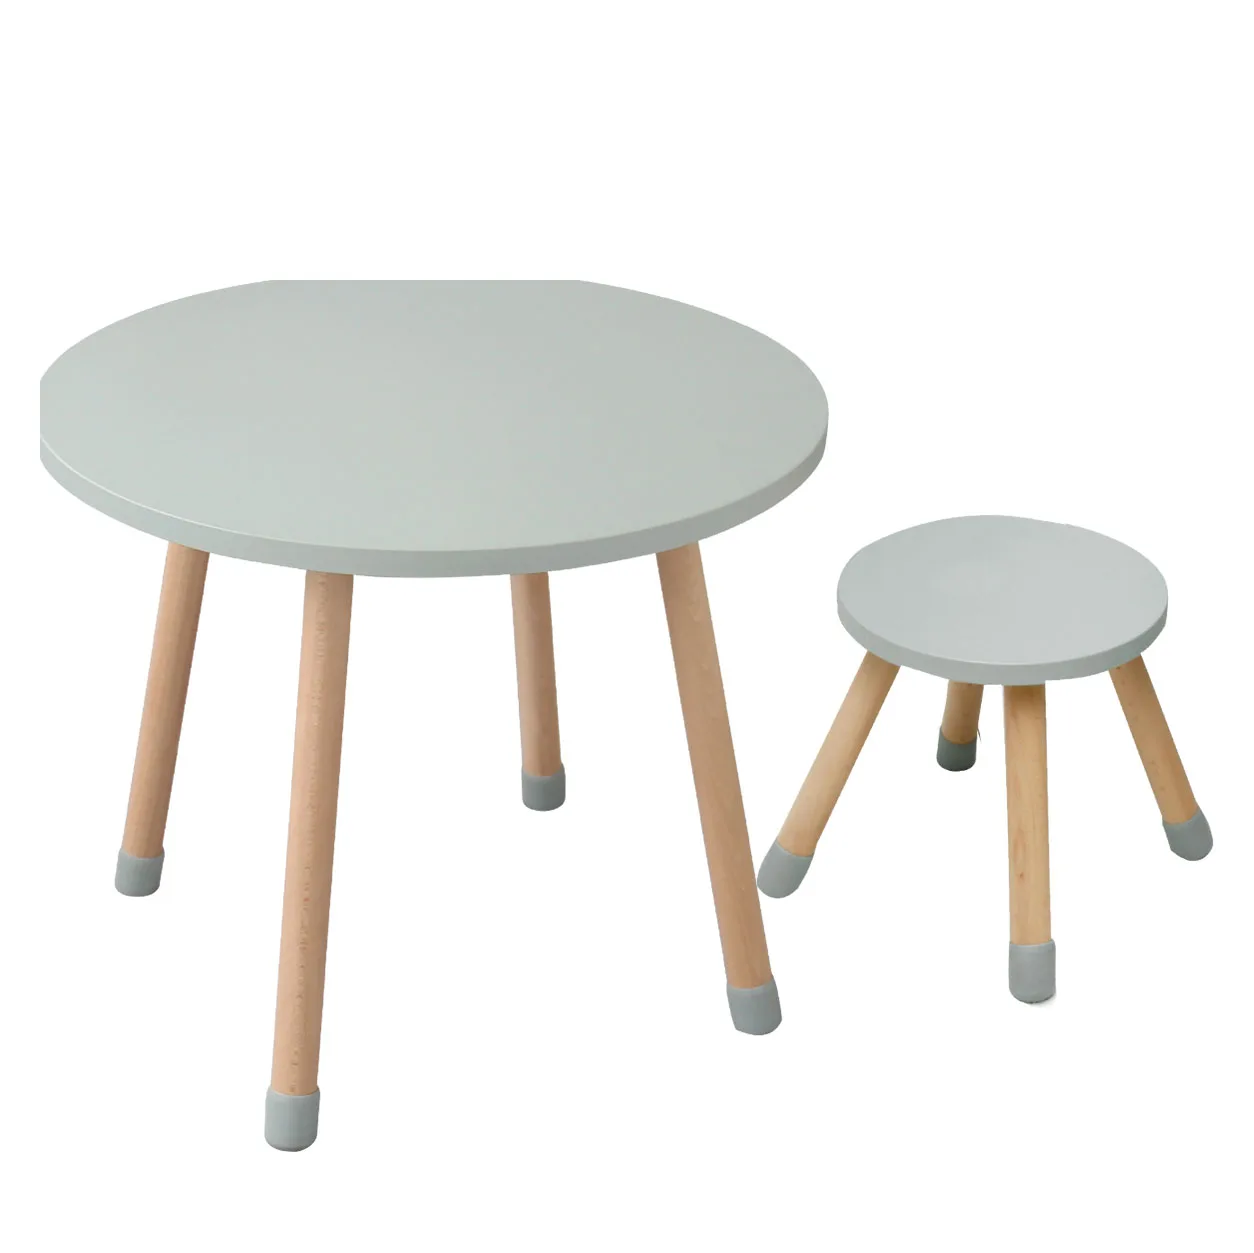 Hot Selling Wooden Round Small Kids Children Writing Table Study